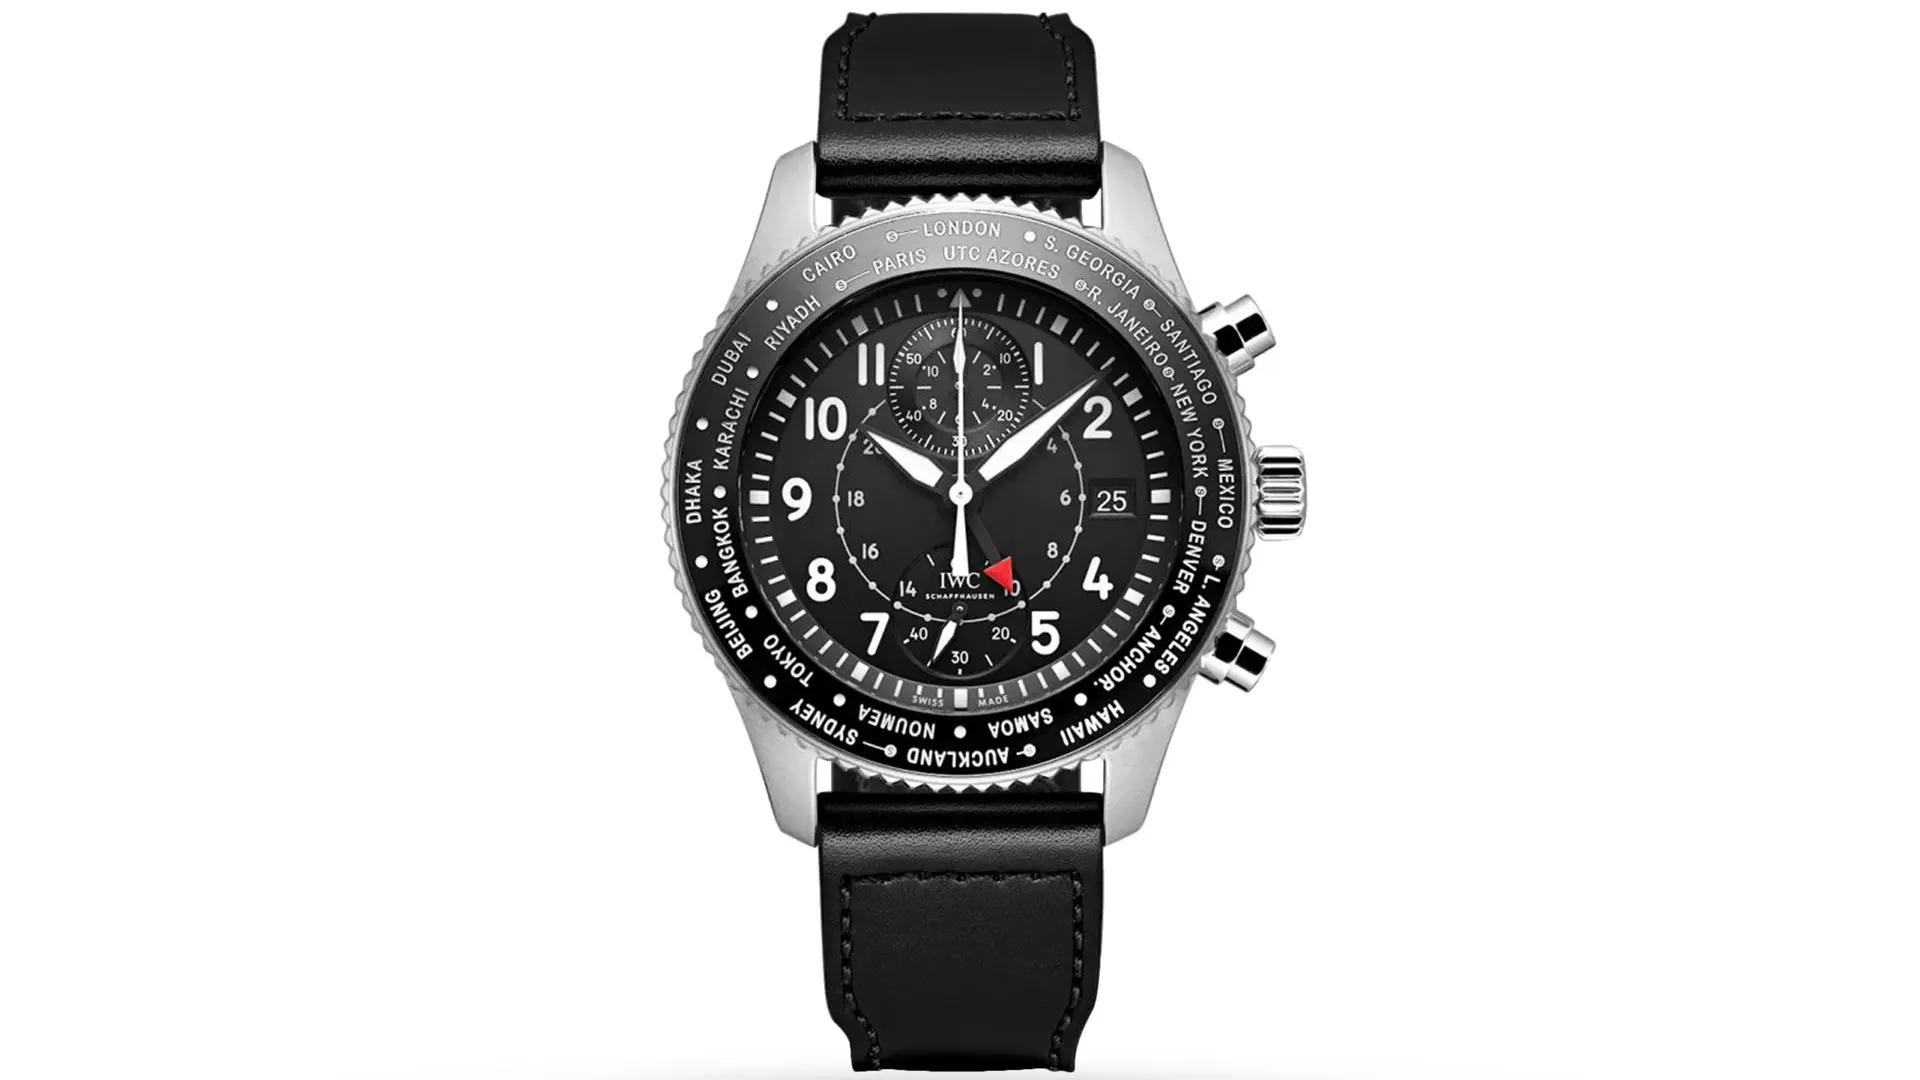 Lifestyle Articles - 10 Best Travel Watches - 0